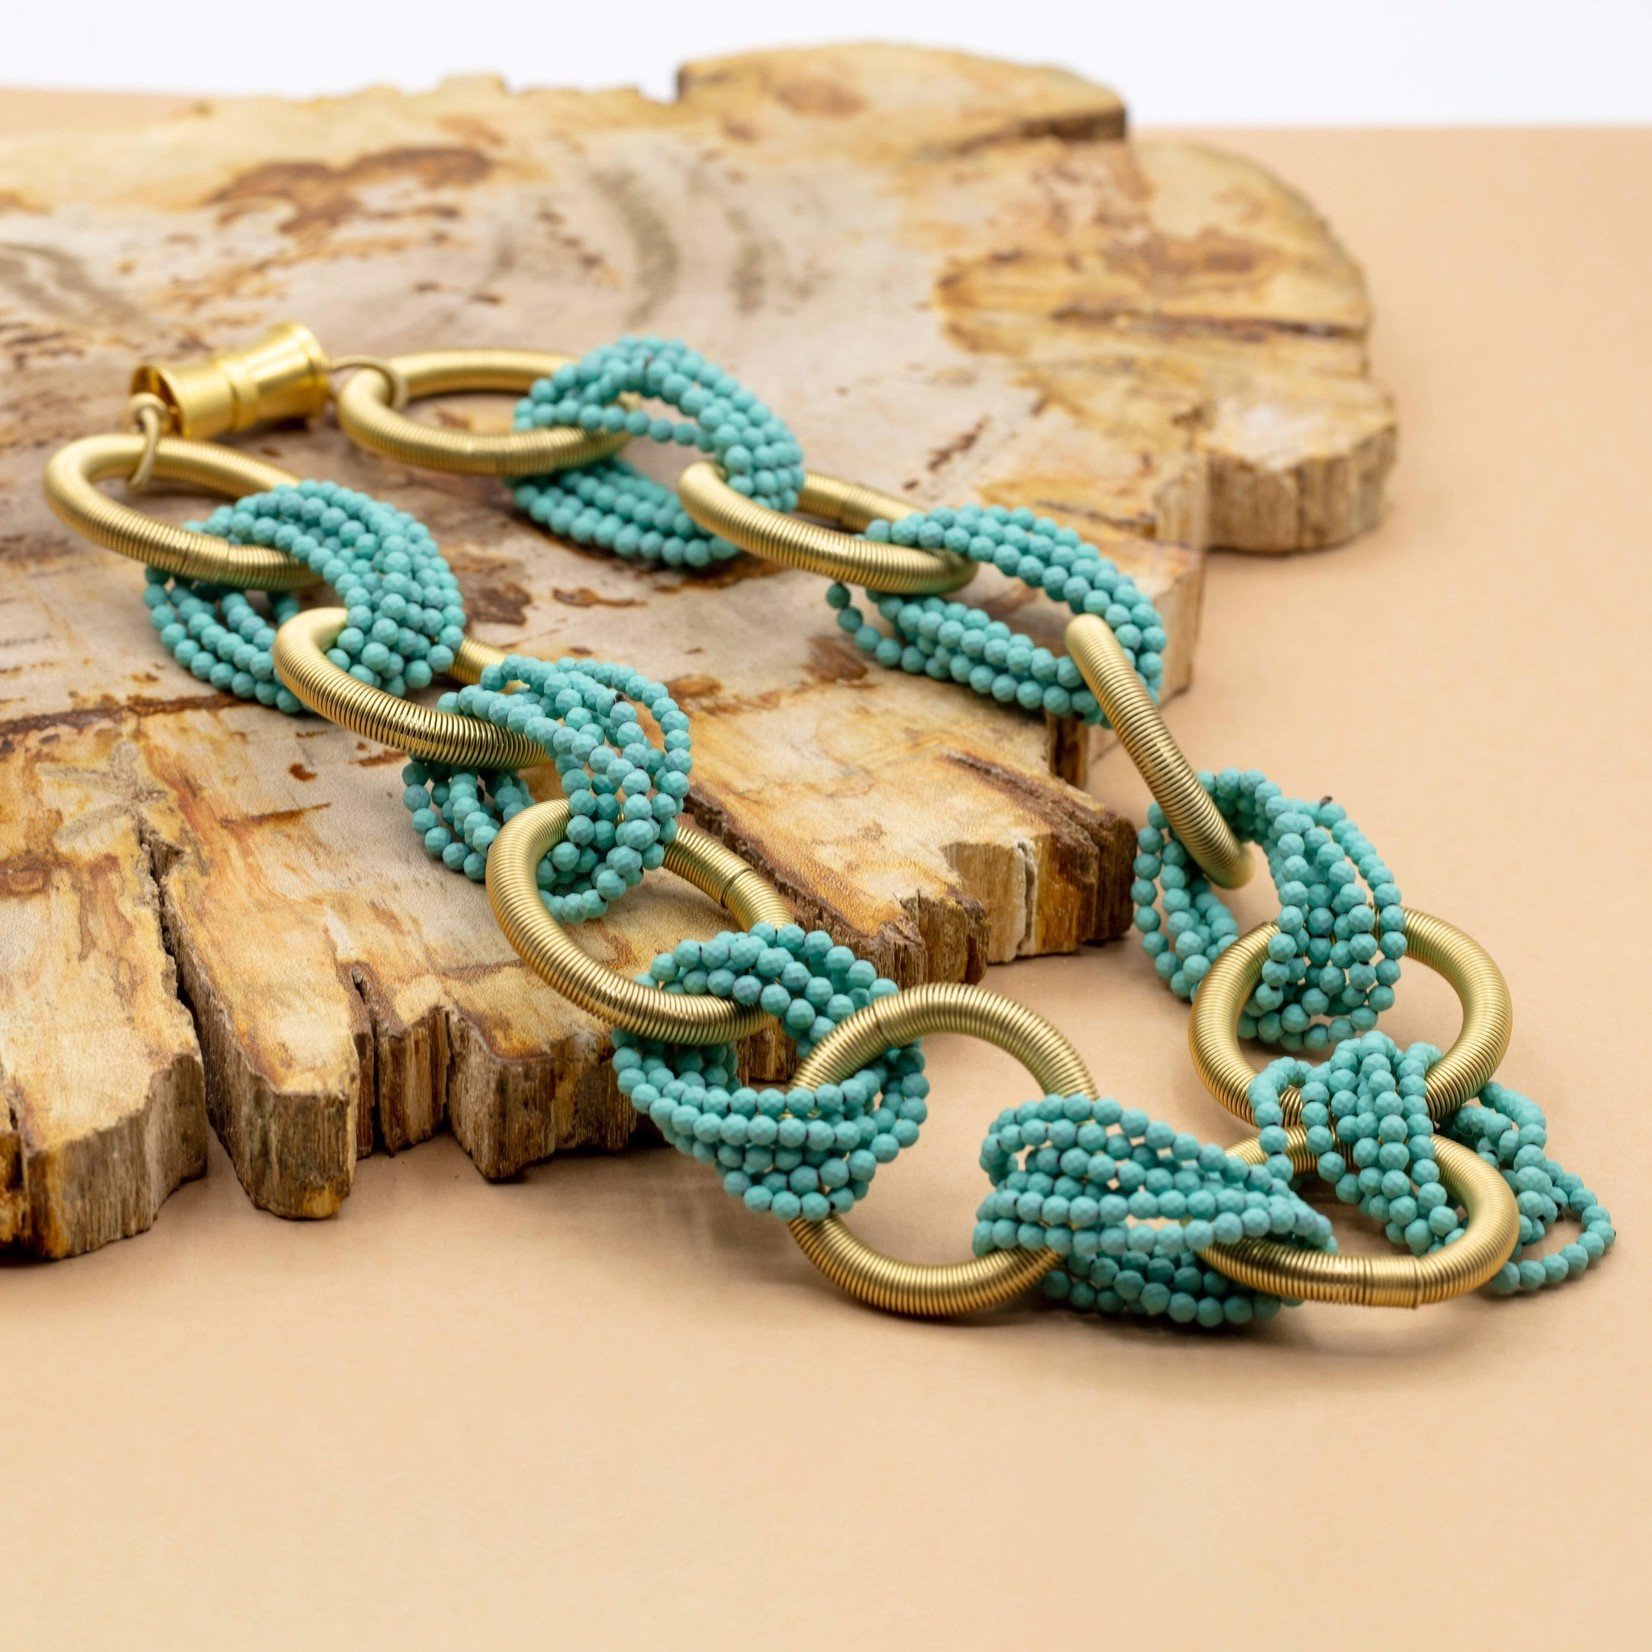 Sea Lily Gold Piano Wire Rings Necklace w/Connecting Turqoise Beads